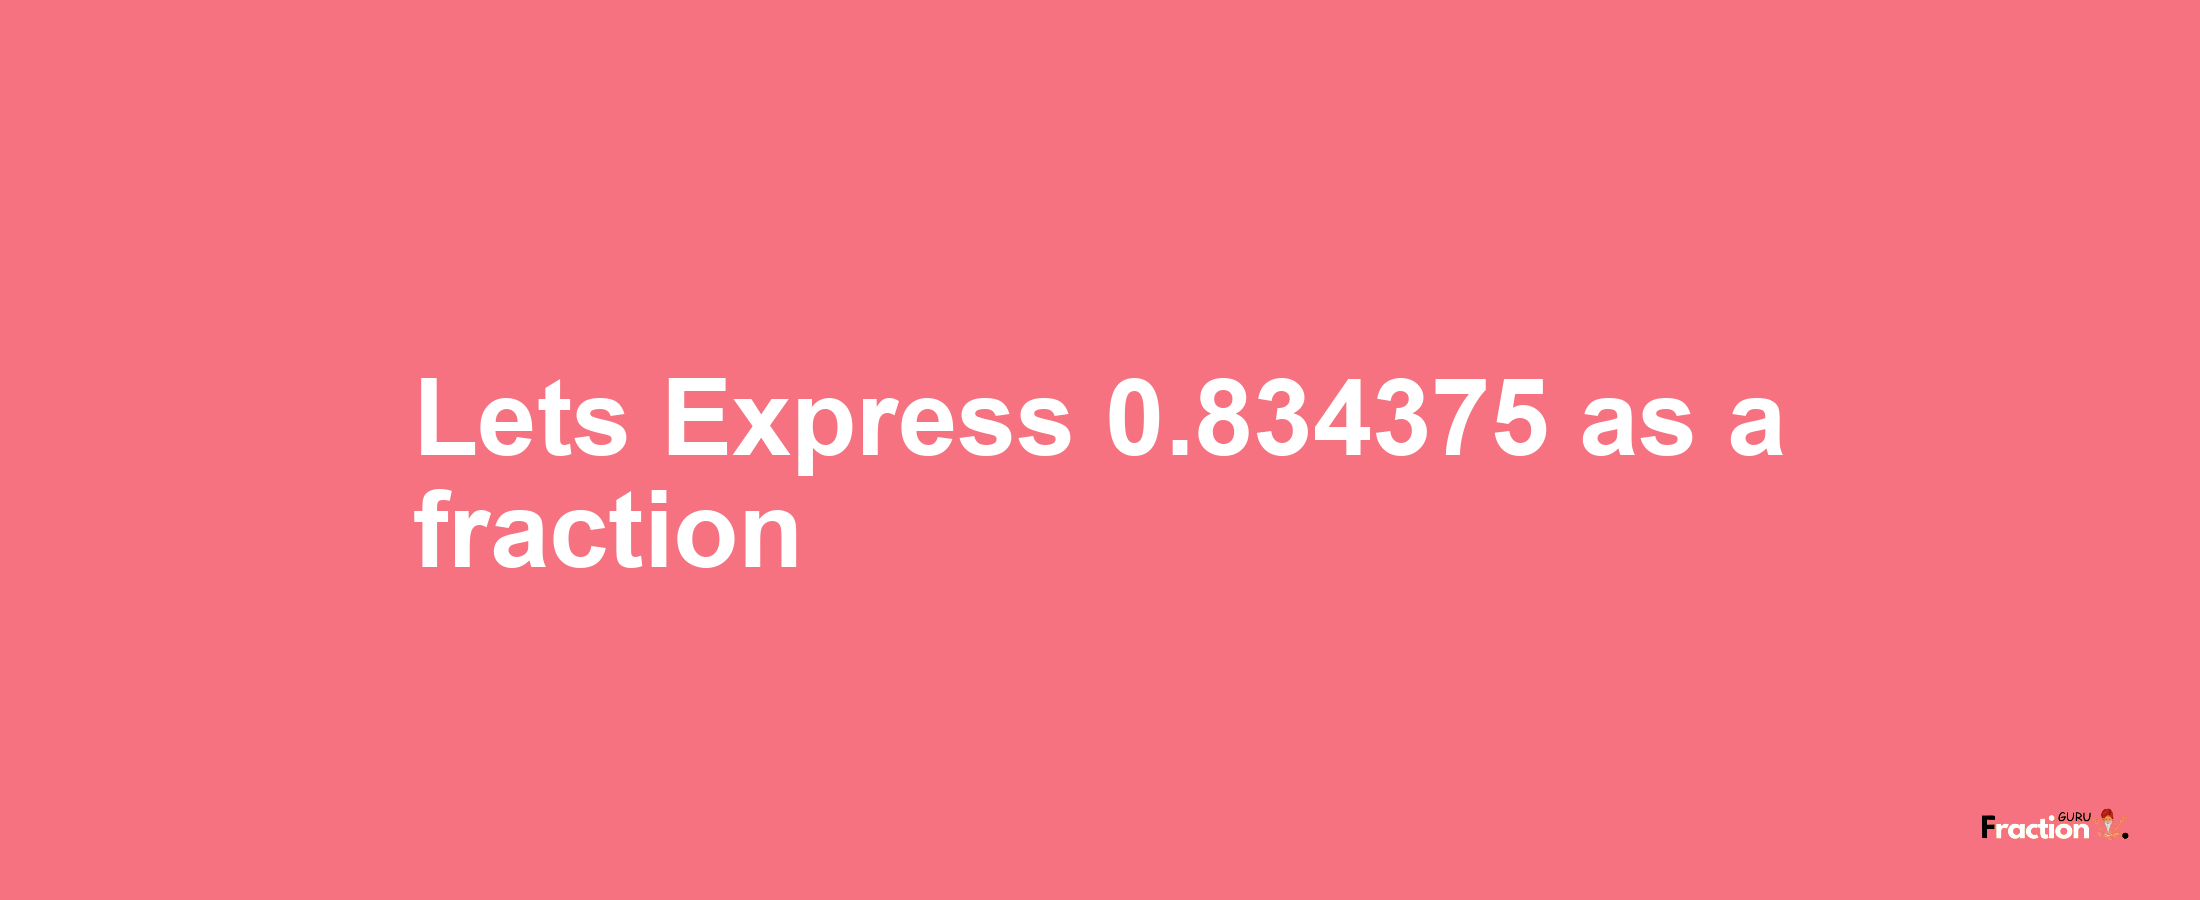 Lets Express 0.834375 as afraction